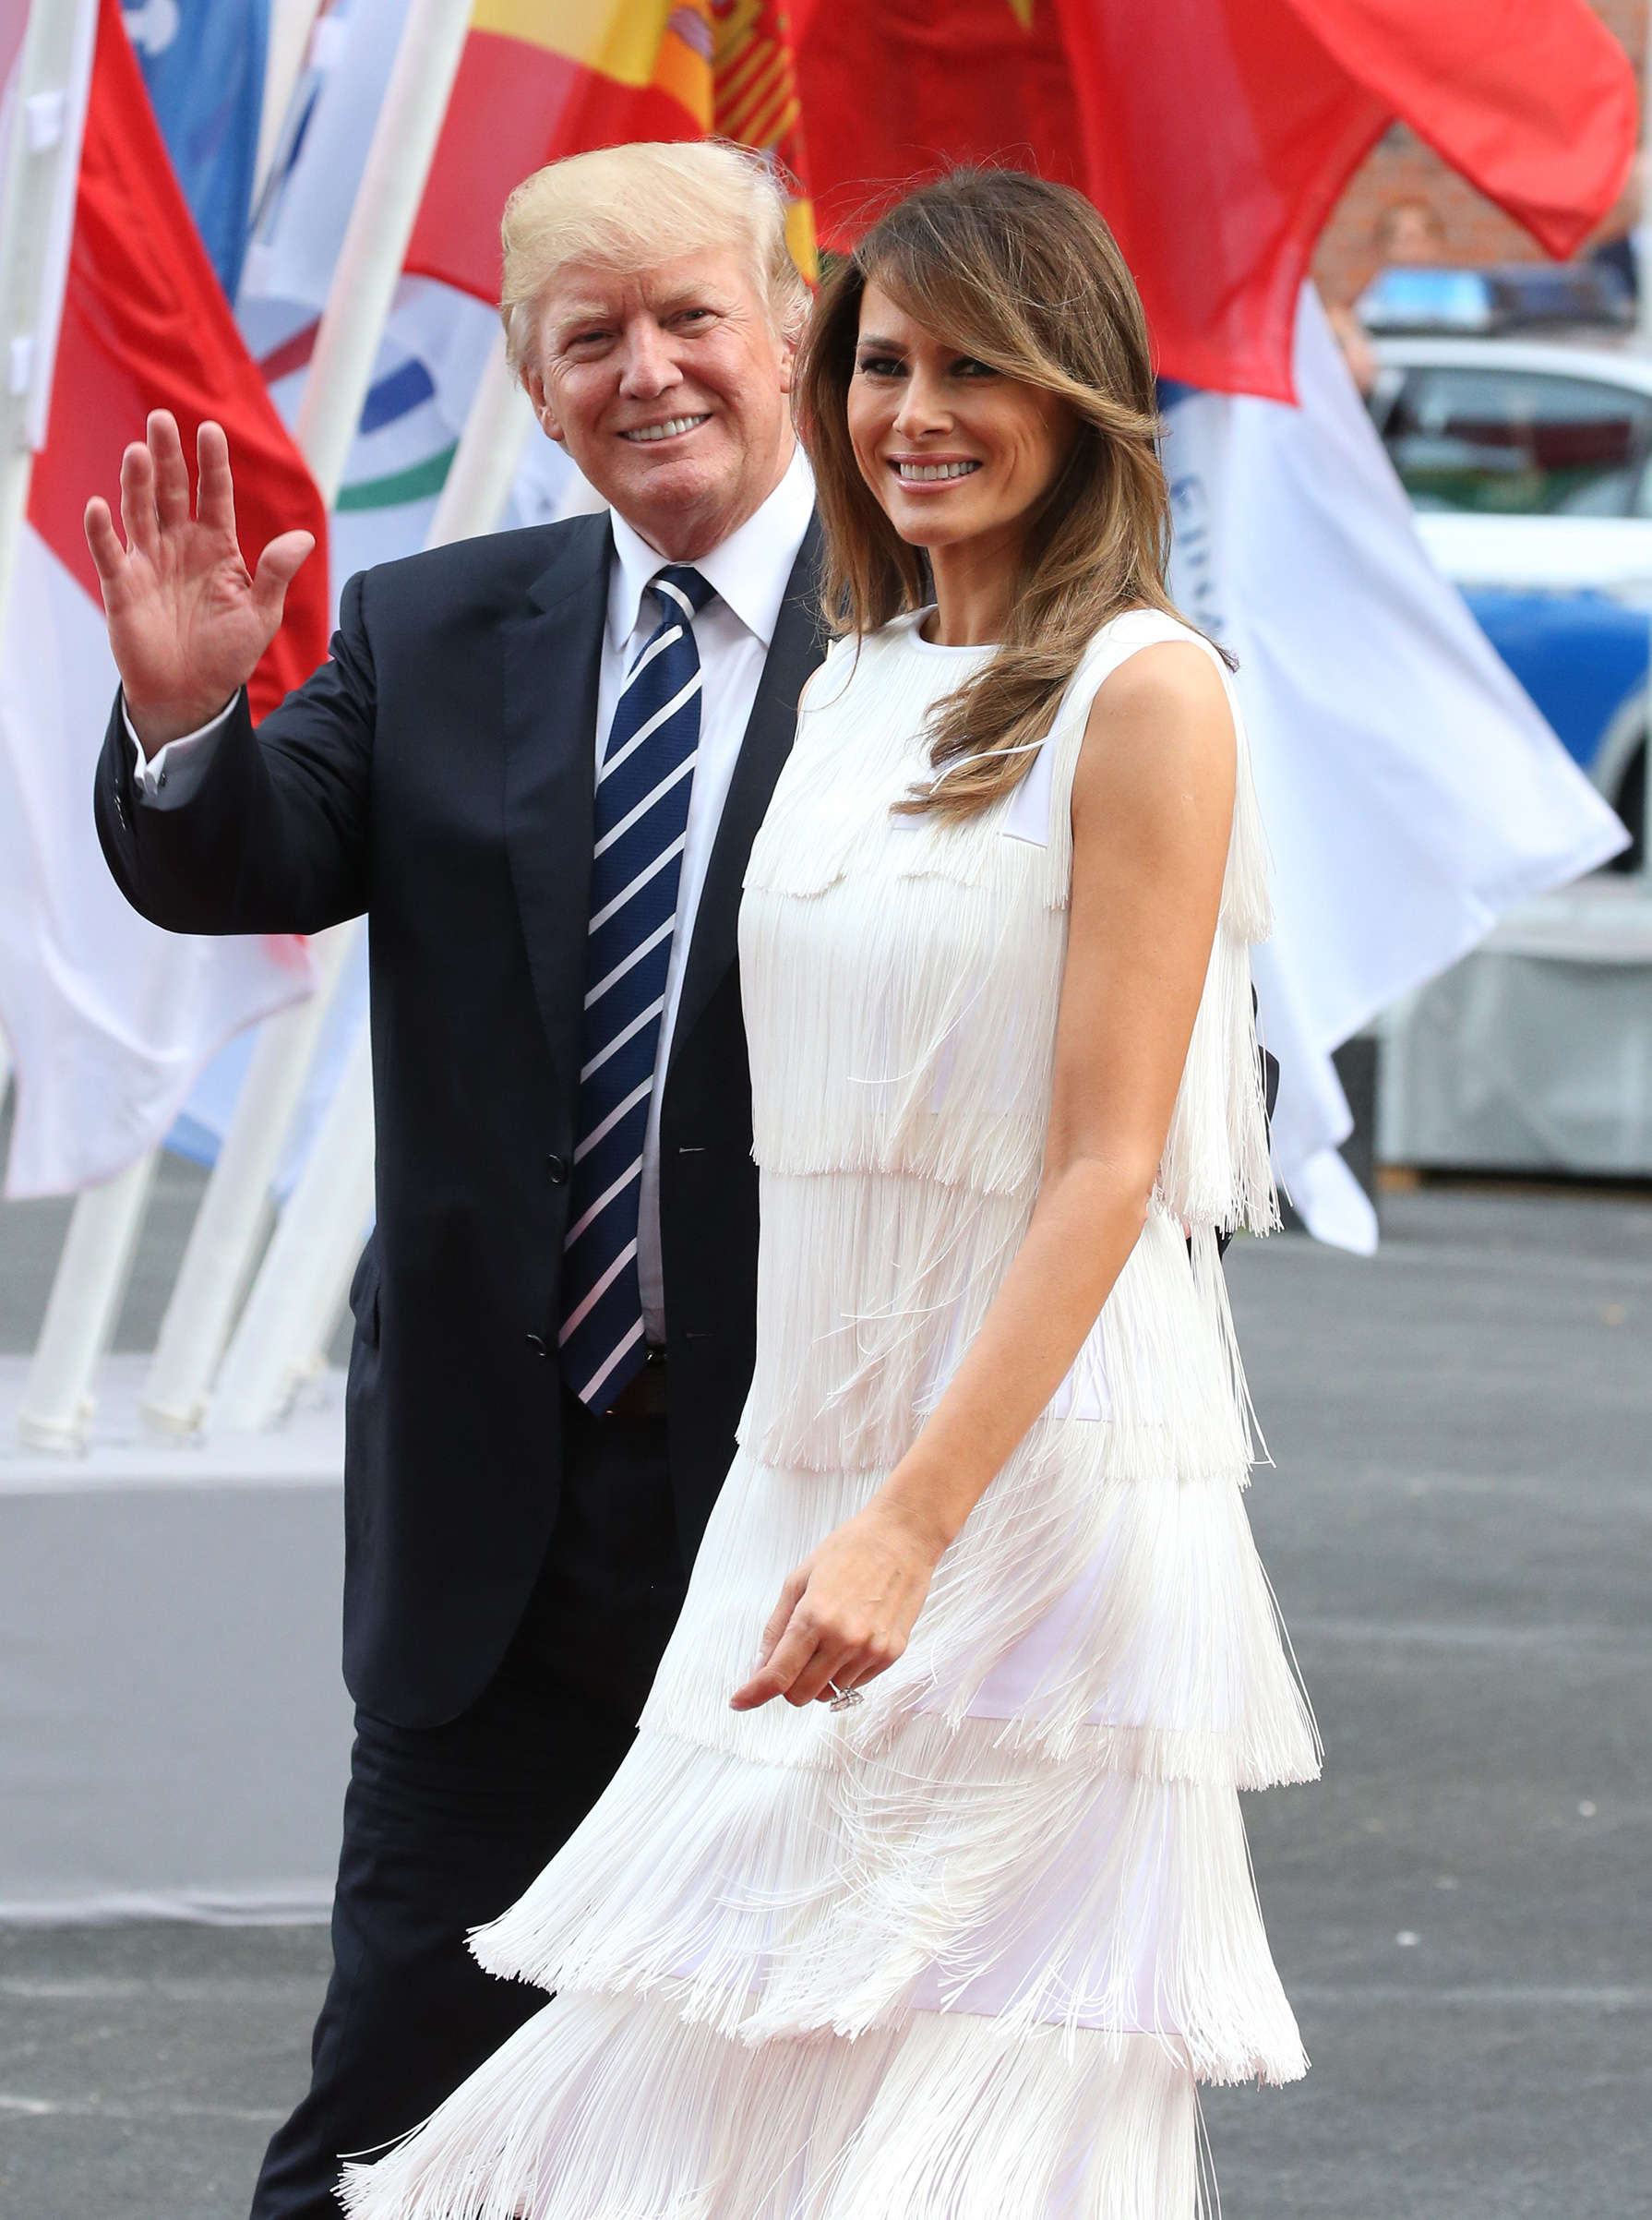 President Donald Trump (L) and first lady Melania Trump (R) wearing a flapper style dress by Michael Kors, arrive to the Elbphilharmonie for the dinner during the G20 Summit on July,7,2017 in Hamburg, Germany.